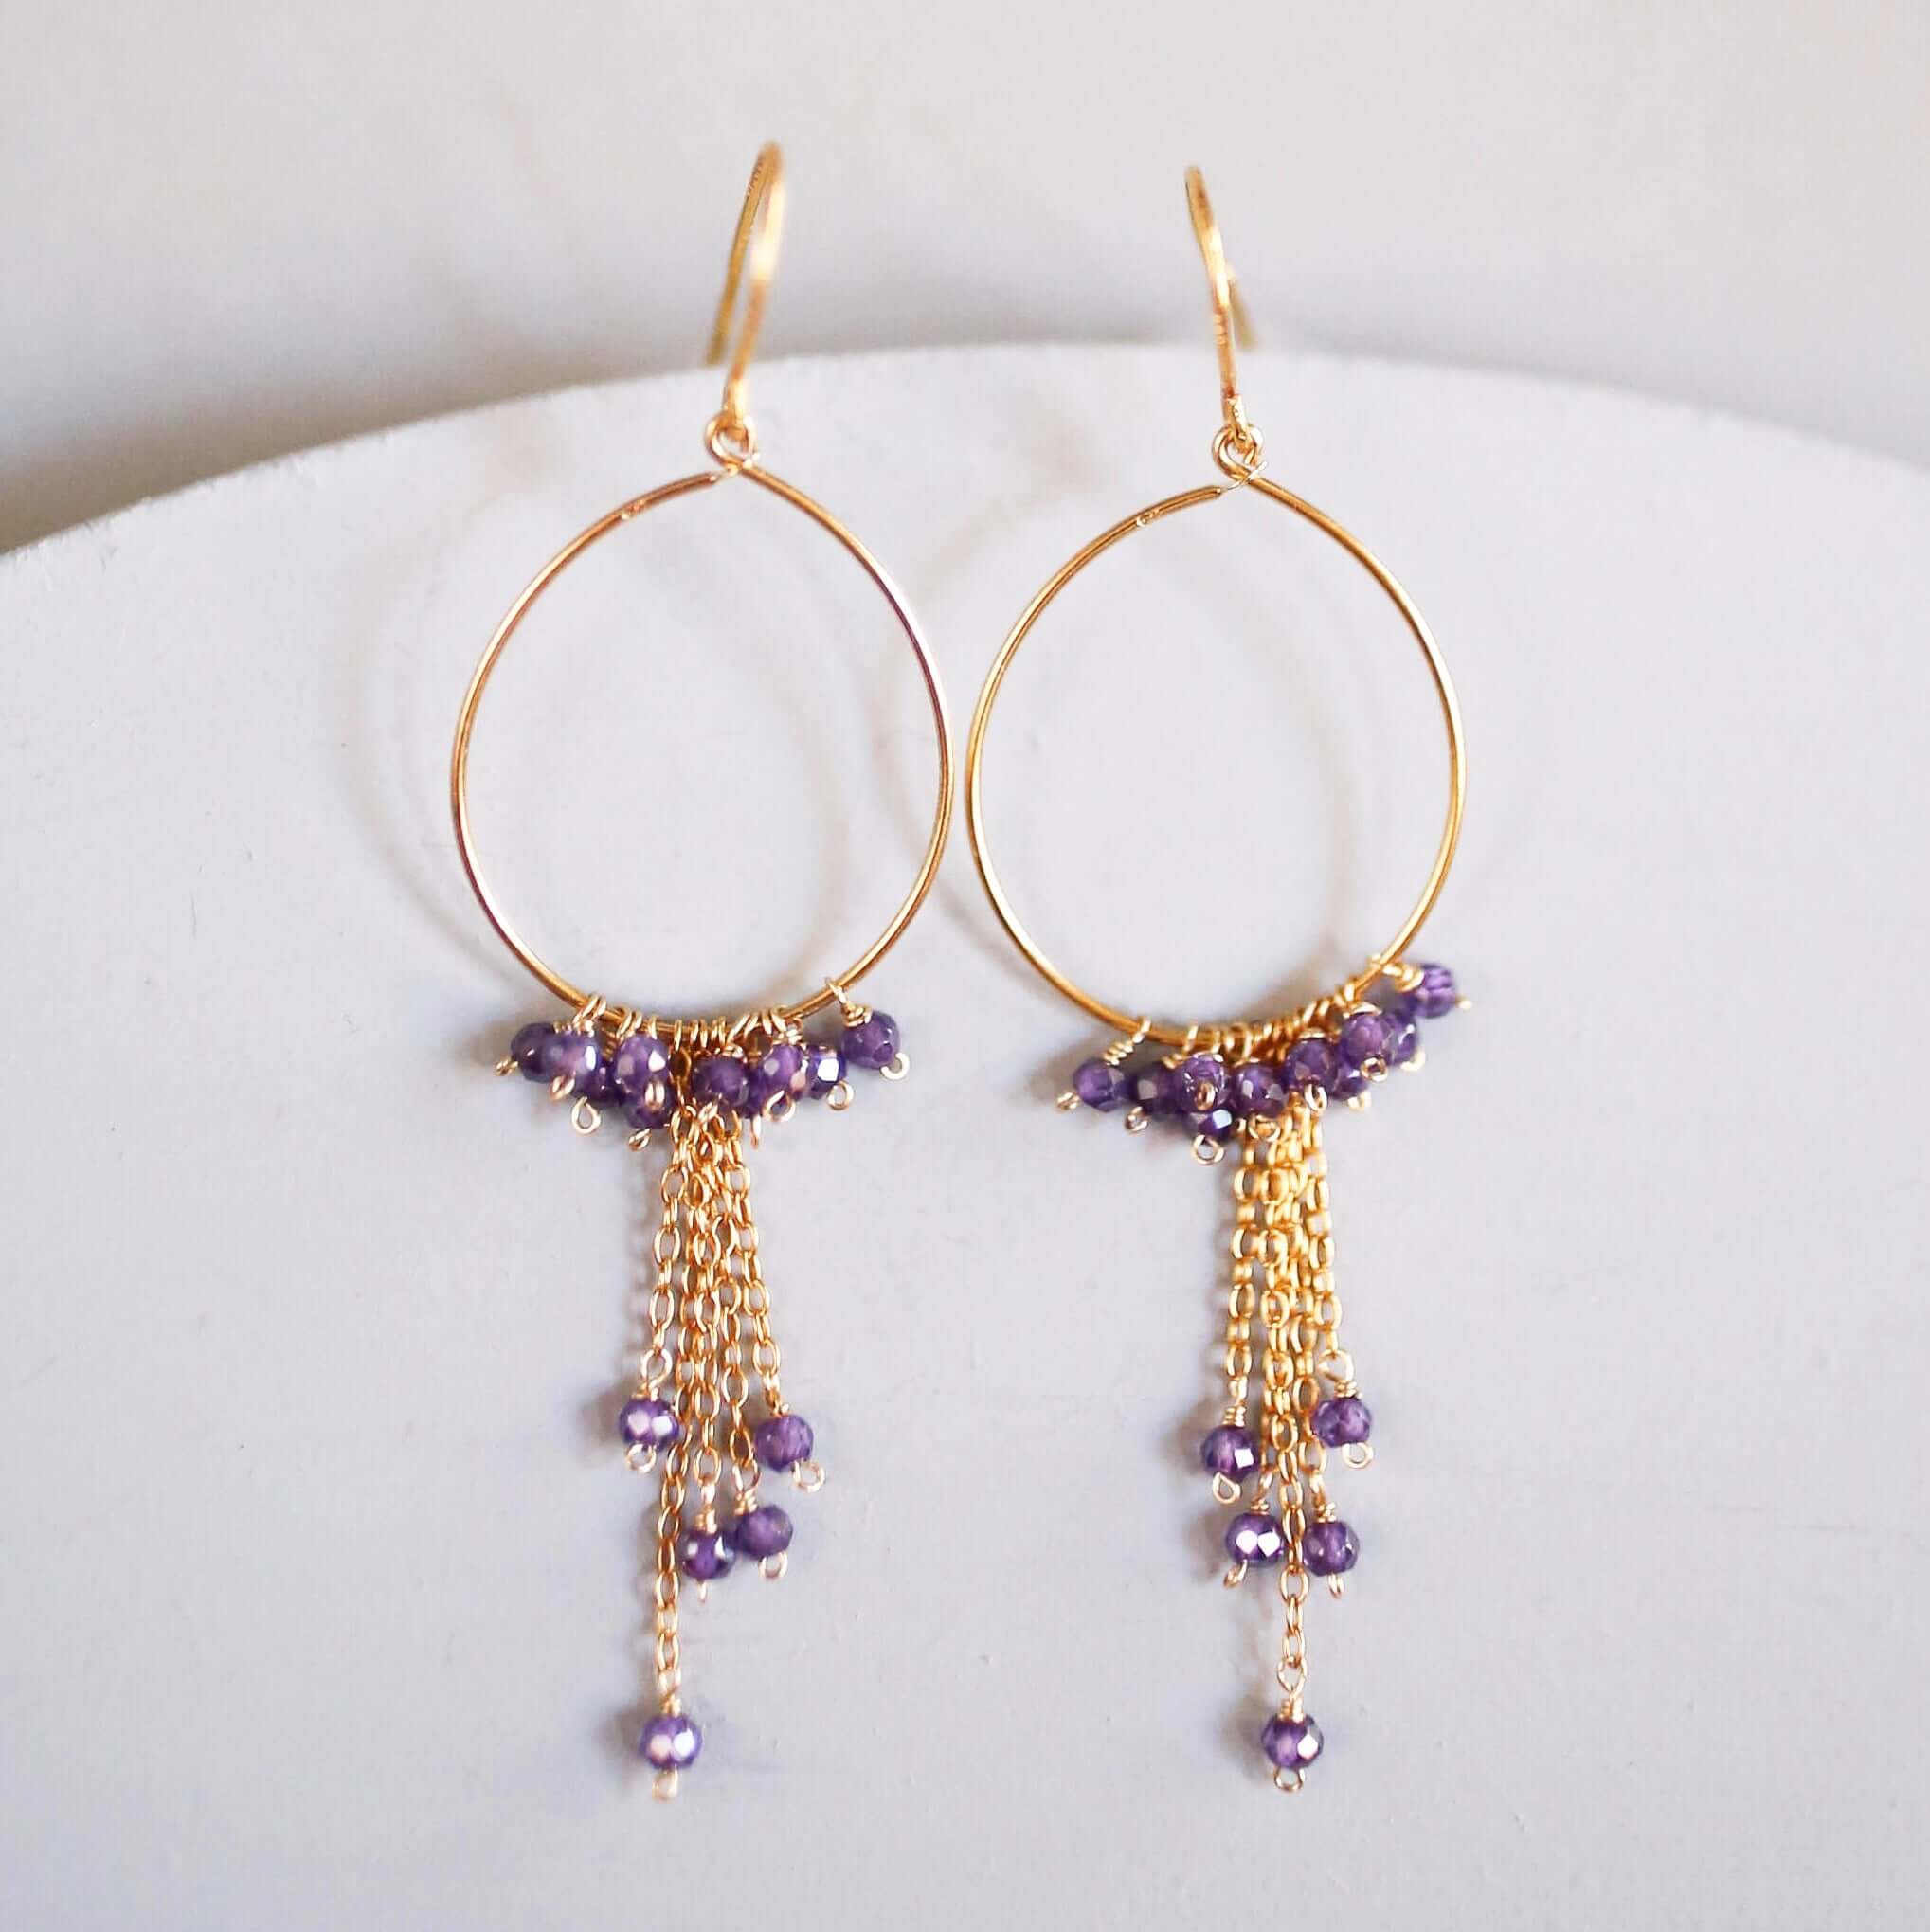 Gold Hoop Earrings with Delicate Chains and Amethyst Stones